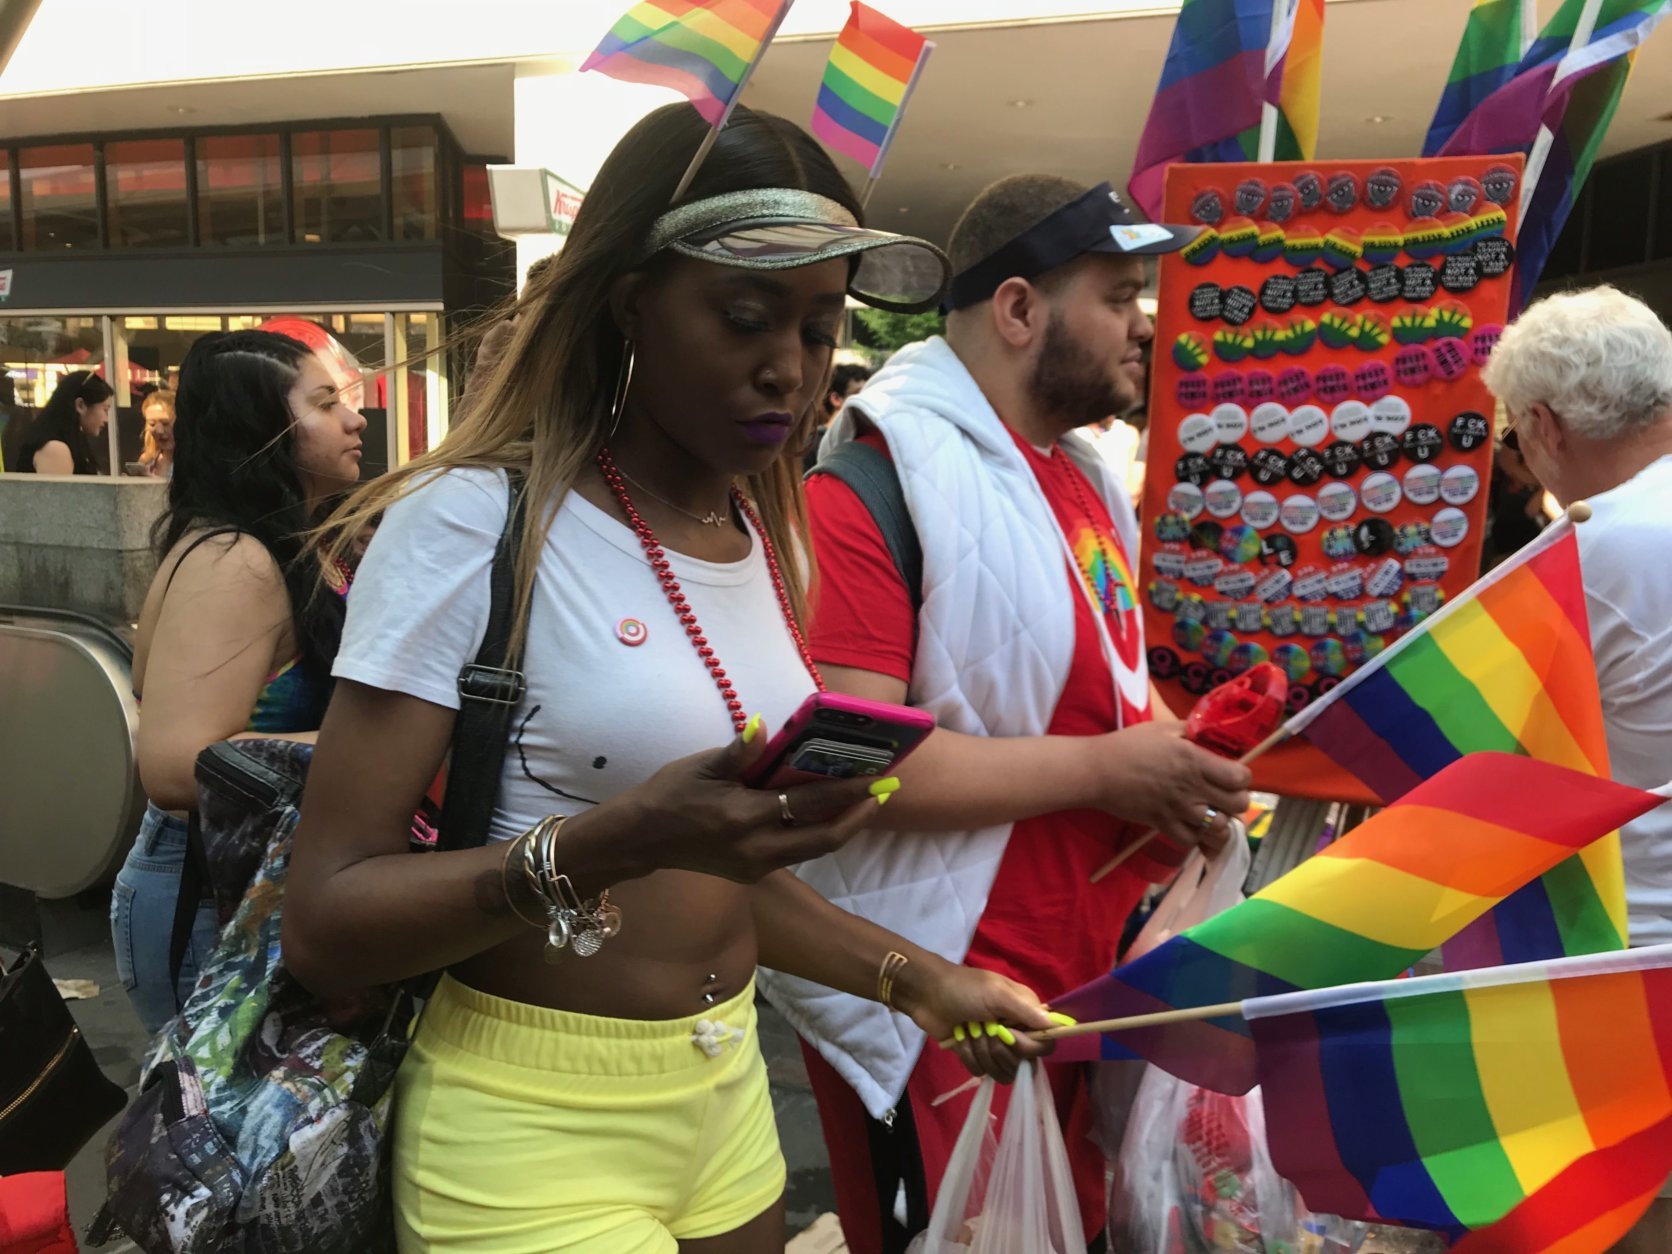 Holding rainbow flags, parade-attendees march on and celebrate Pride Month at D.C.'s Pride Parade. (WTOP/Dick Uliano)